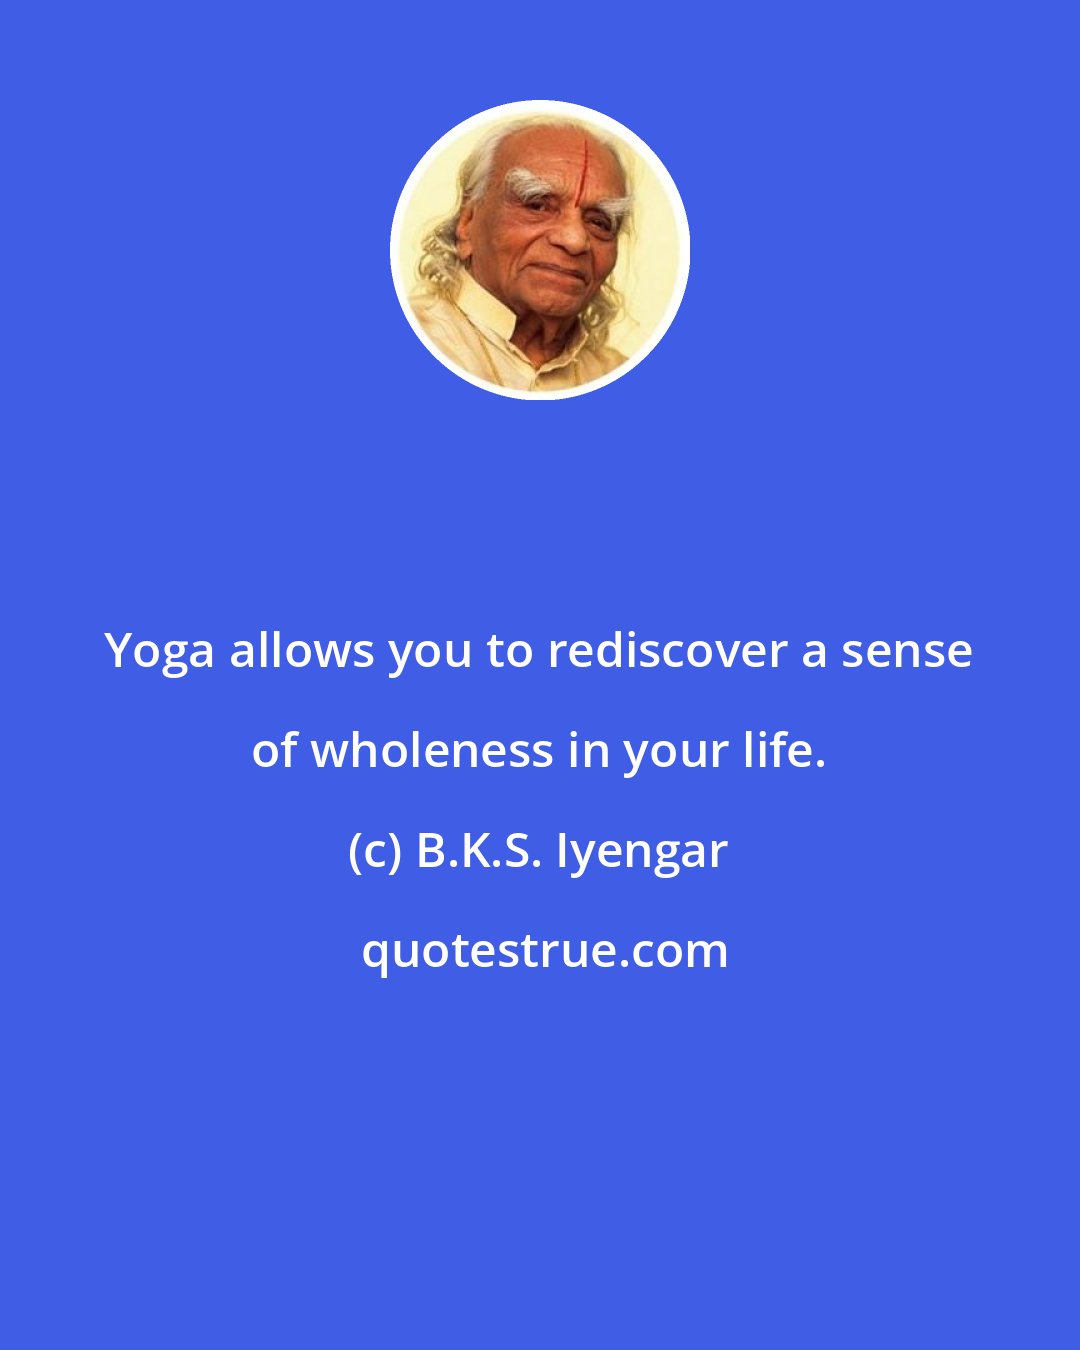 B.K.S. Iyengar: Yoga allows you to rediscover a sense of wholeness in your life.